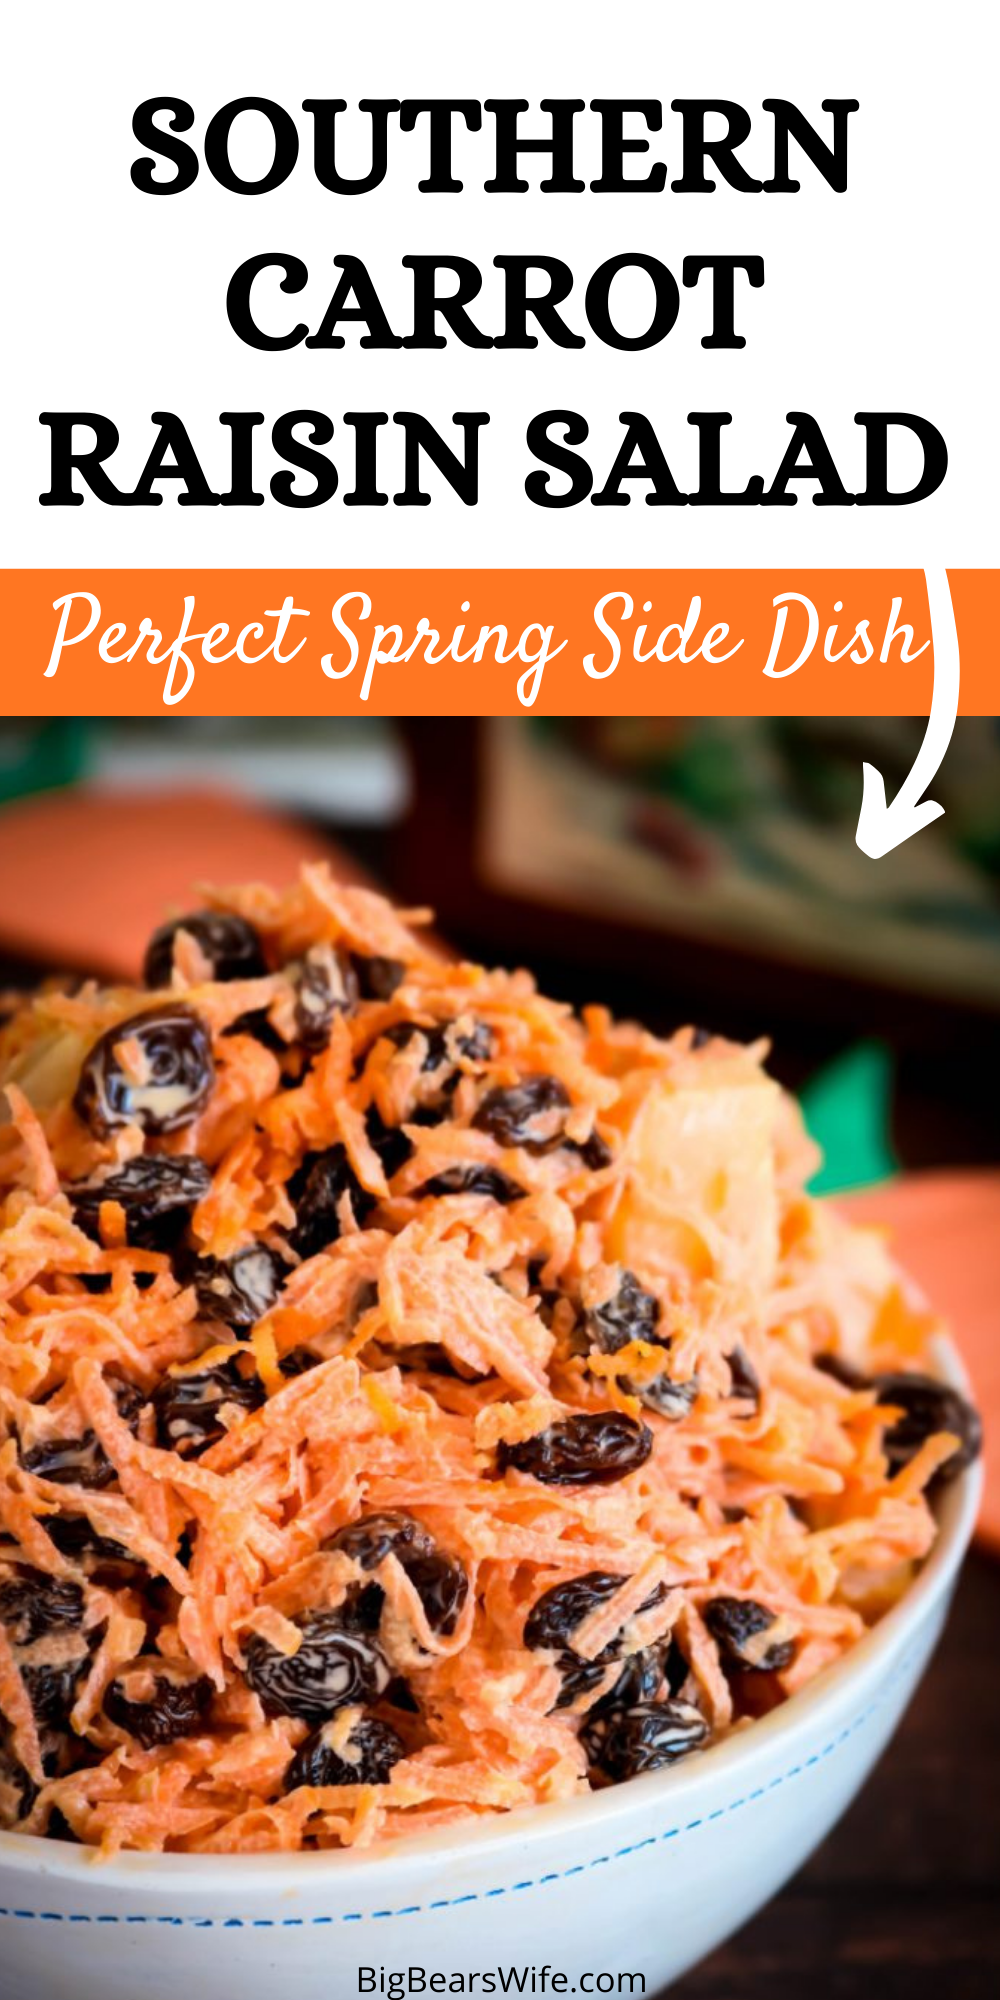 This southern Carrot Raisin Salad tastes like homemade southern coleslaw without the cabbage. It’s easy to make and a great side dish for picnics, potlucks, cookouts and Sunday dinners! via @bigbearswife